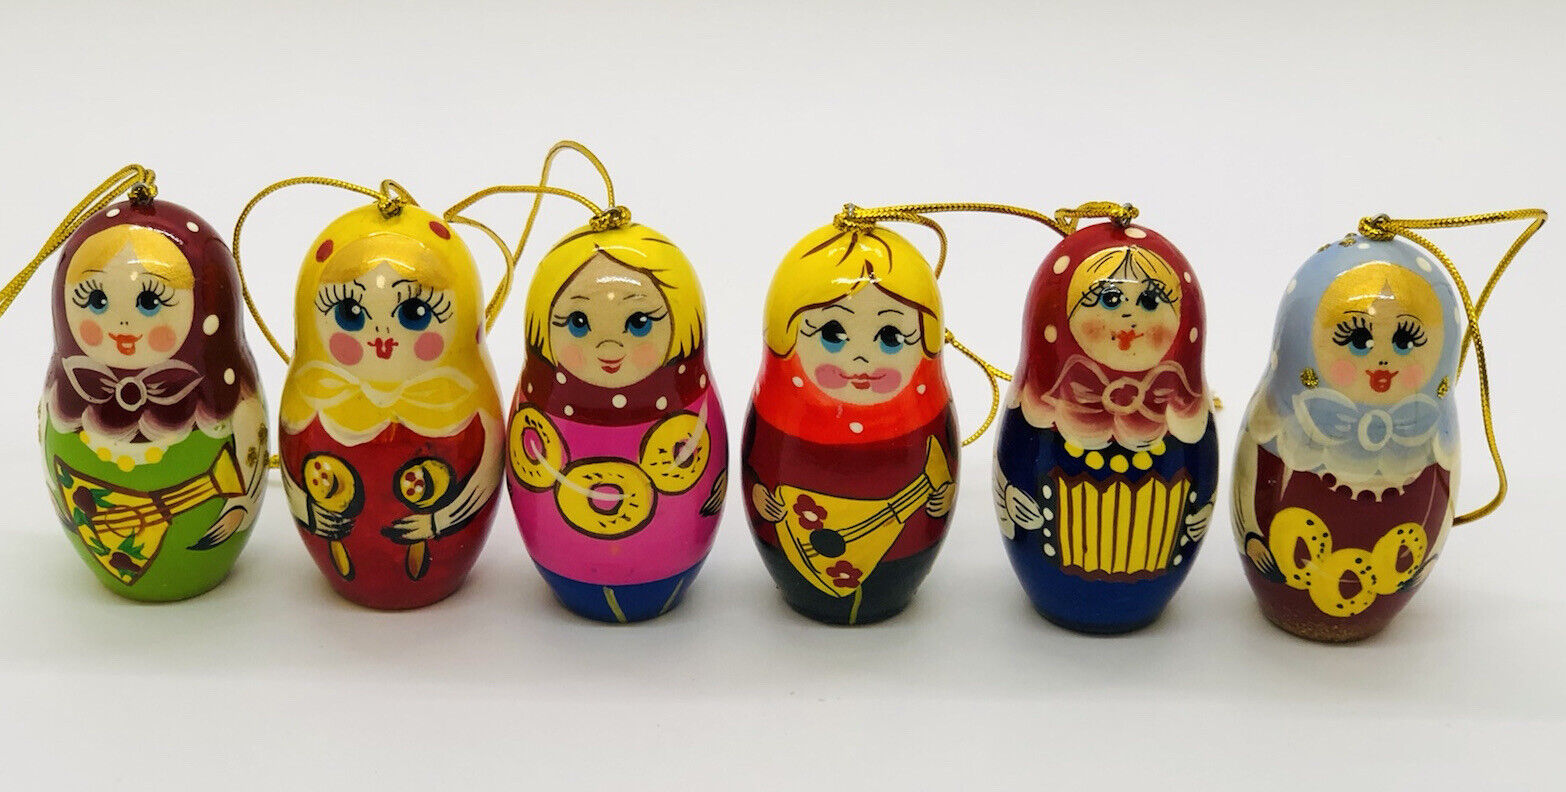 6 Matryoshka Dolls Authentic Wooden Russian Christmas Ornaments Hand Painted